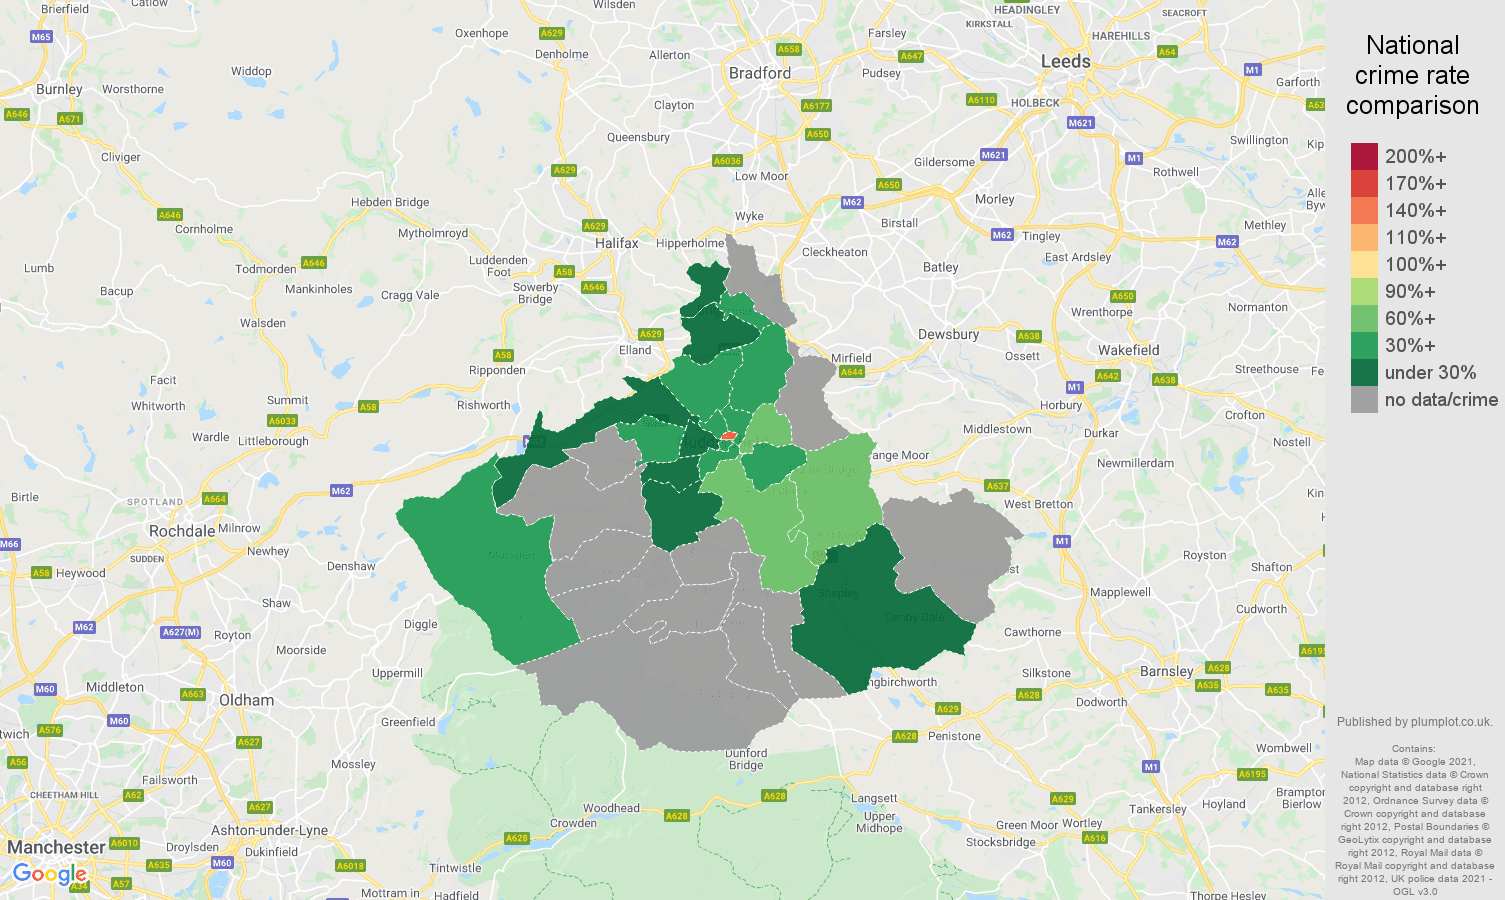 Huddersfield bicycle theft crime rate comparison map